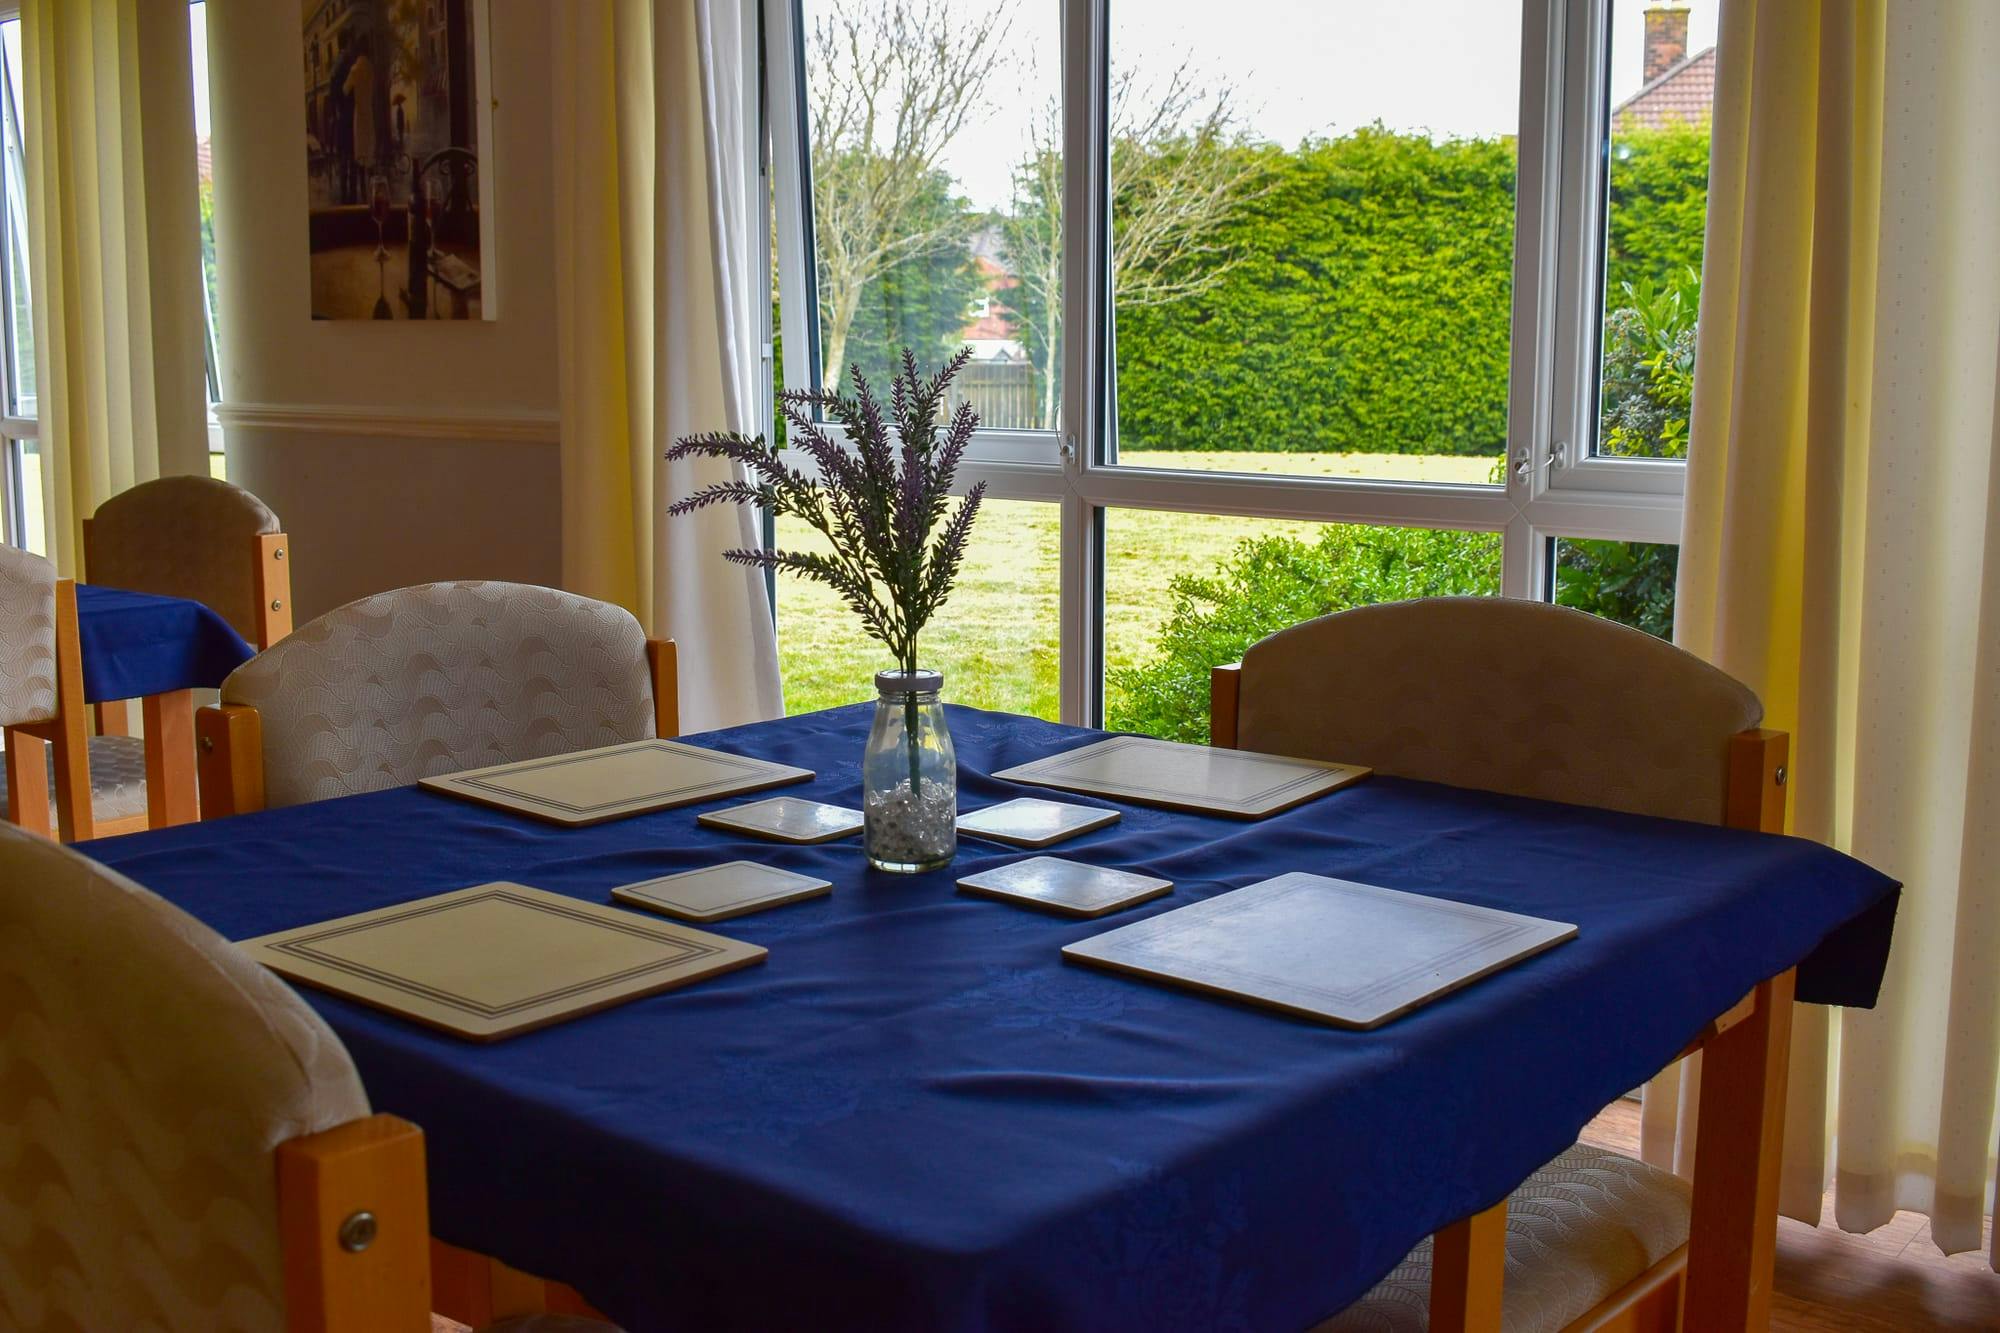 Dining area at Mahogany Care Home, Newtown, Wigan, Lancashire